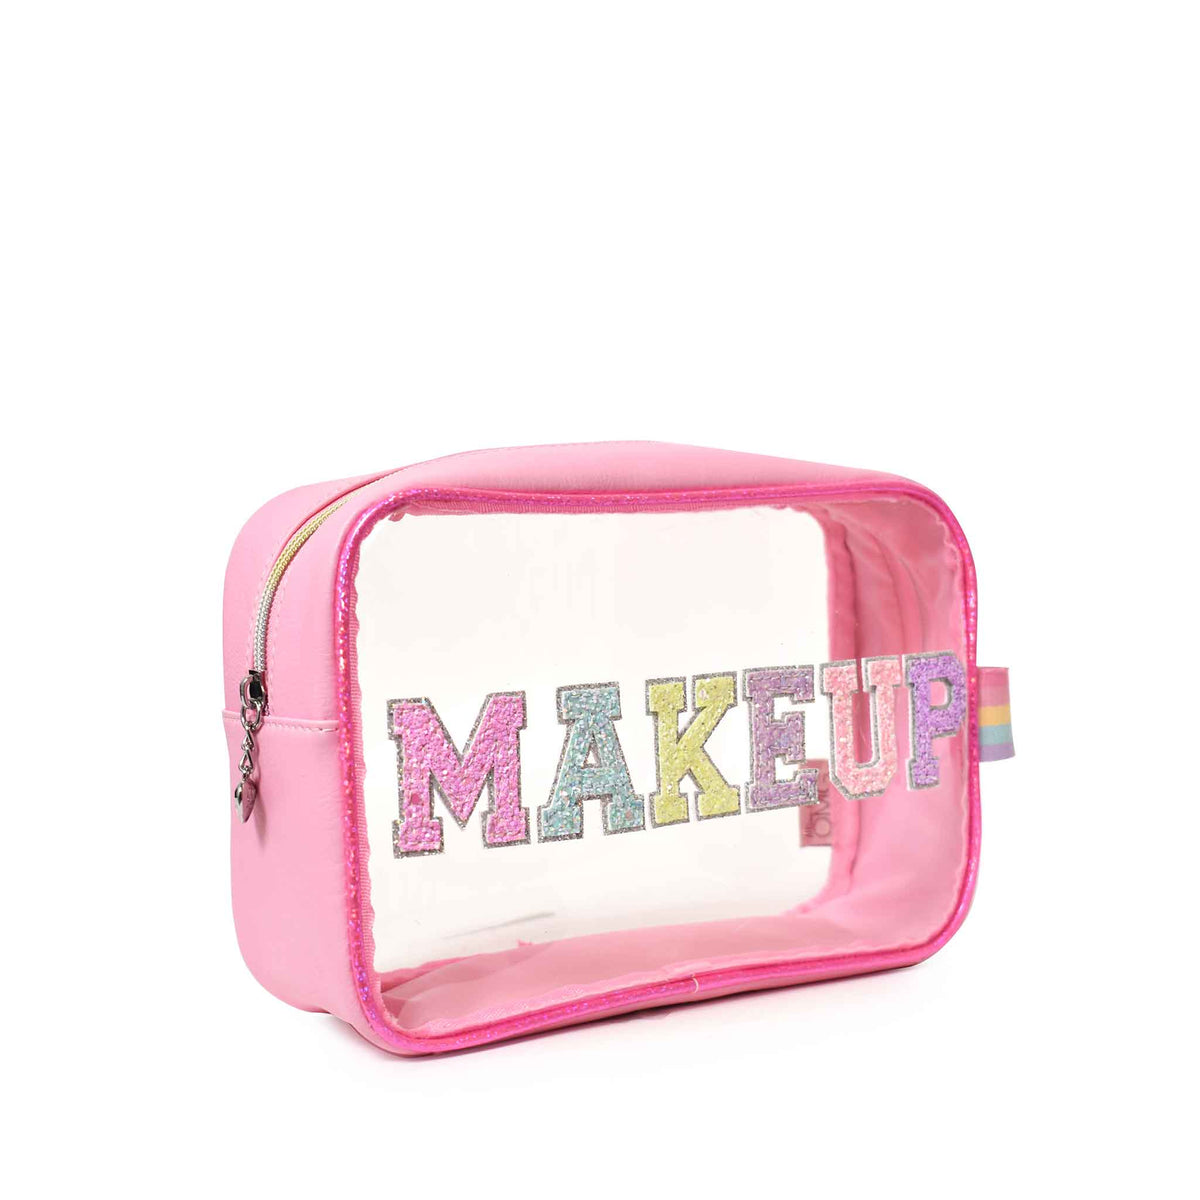 OMG ACCESSORIES CLEAR MAKEUP POUCH - PINK – Meant 2 Be